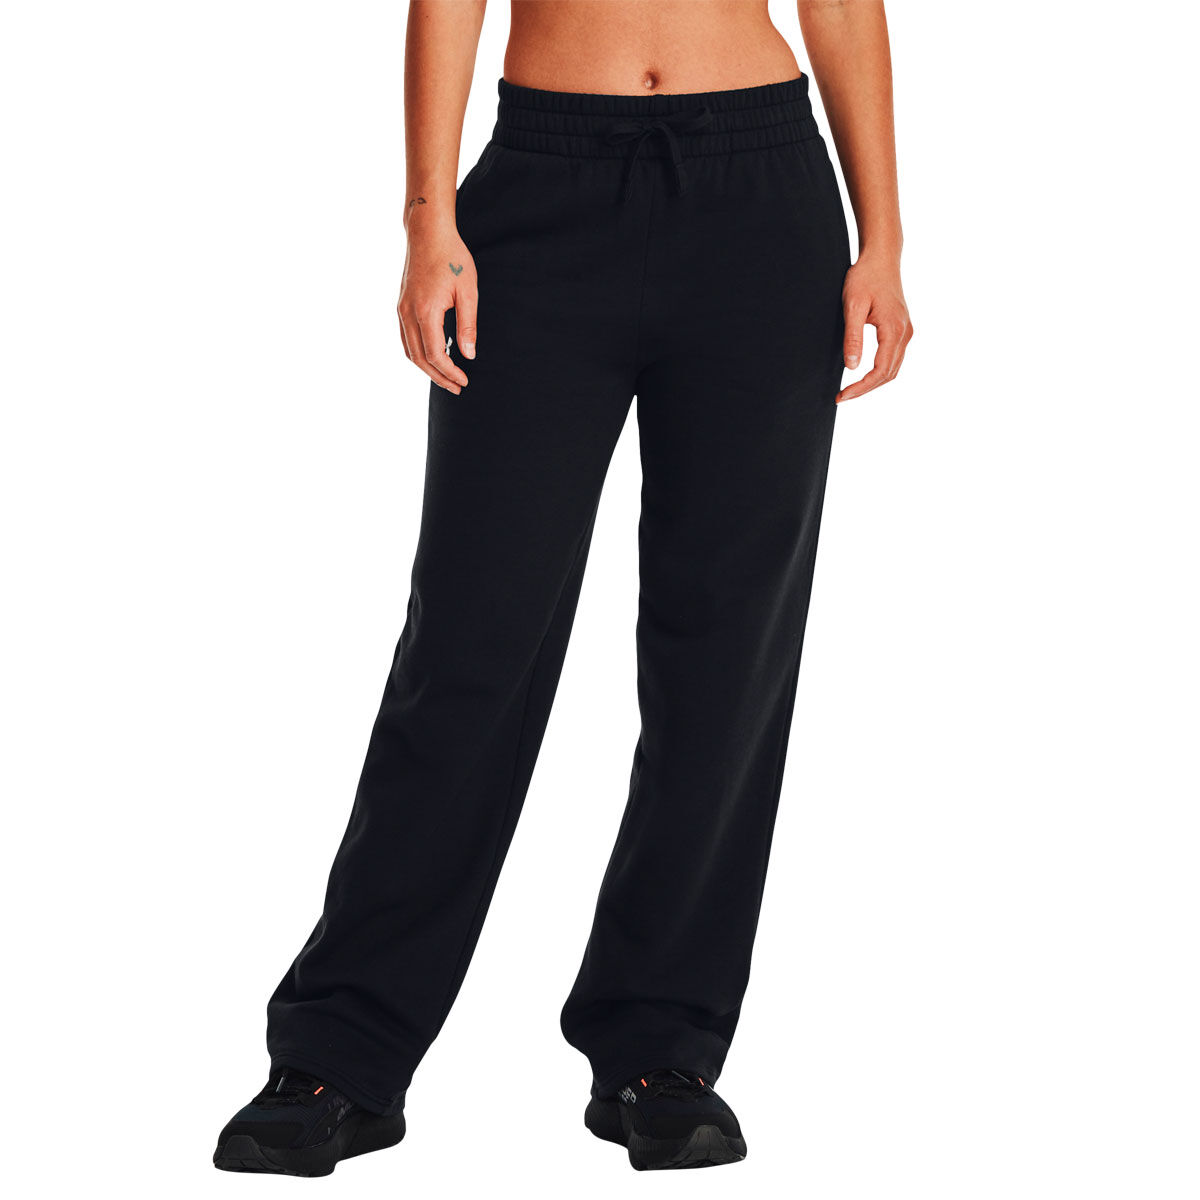 Womens sports pants Under Armour MERIDIAN JOGGER W grey